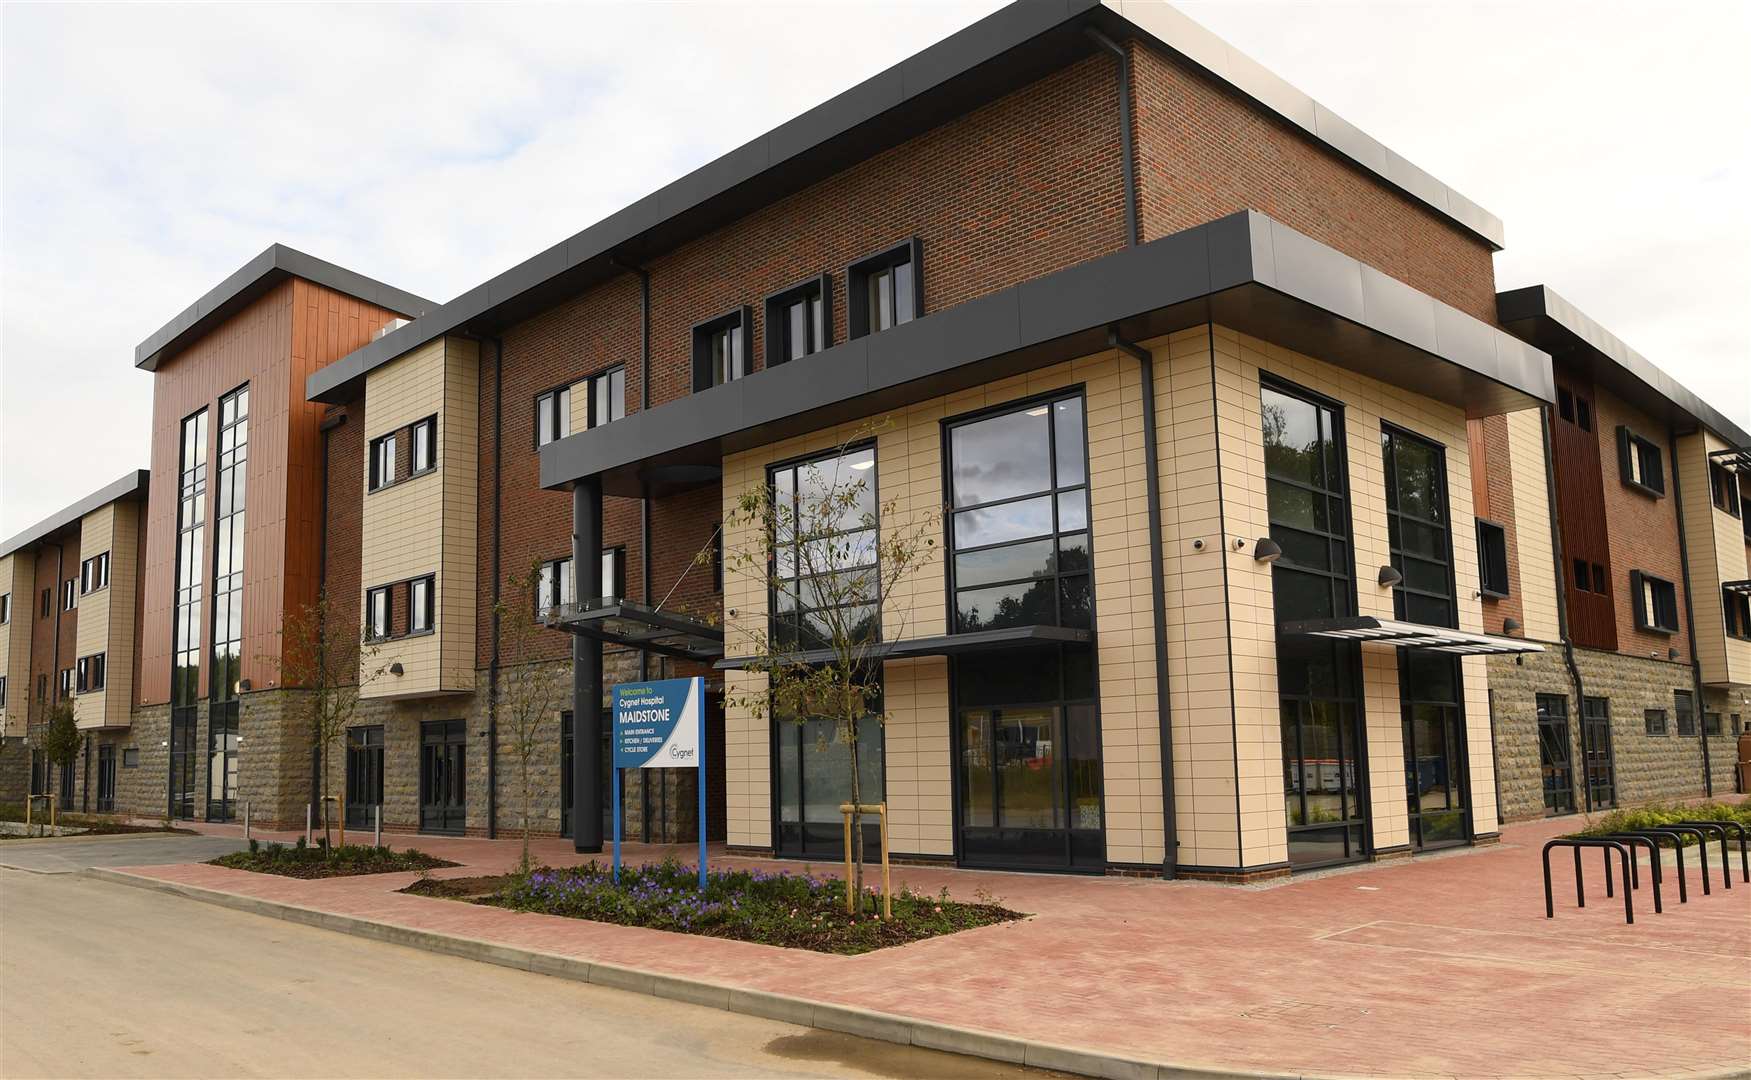 The new £18 million mental health hospital has opened at Kent Medical Campus, off Junction 7 of the M20